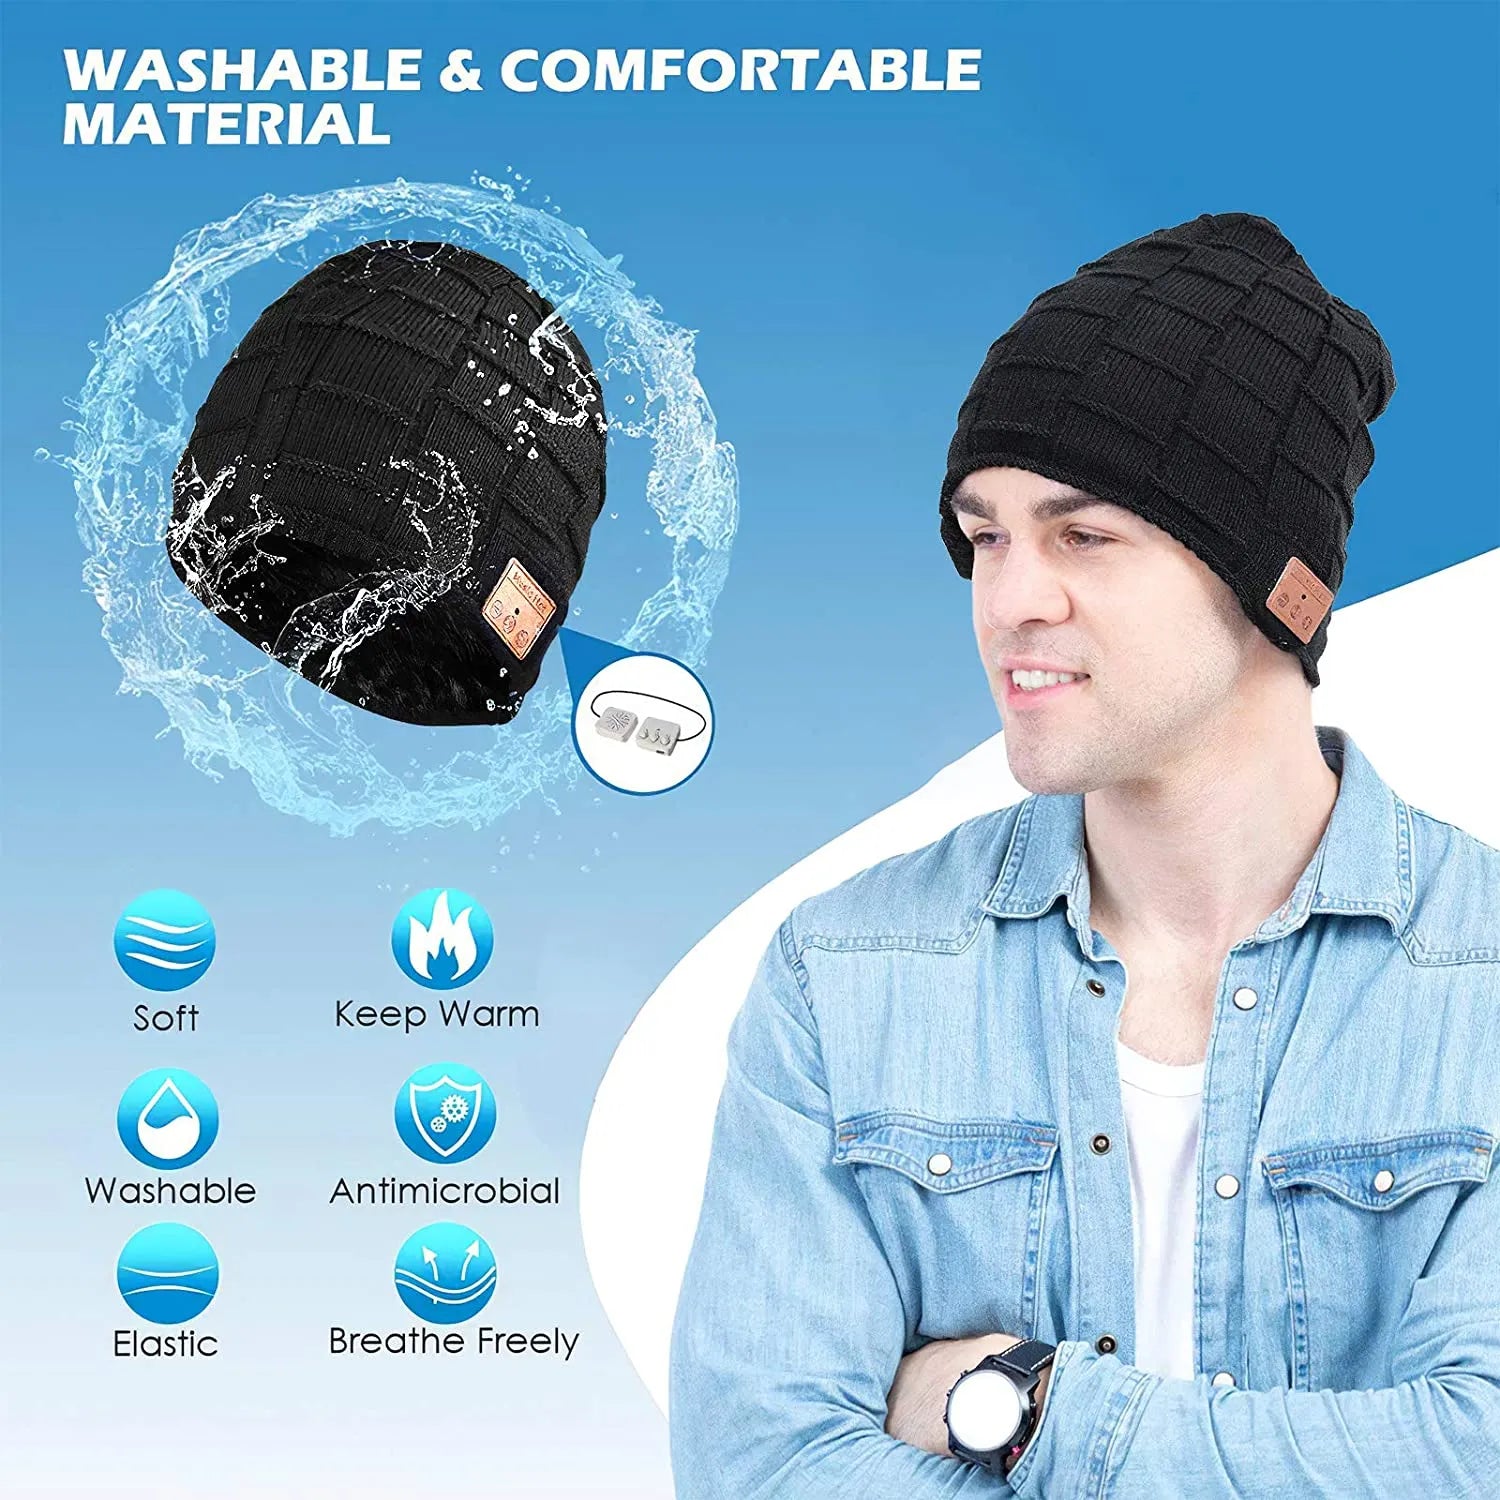 A beanie-wearing person controls a smartphone music app, highlighting the hat's sound capabilities.